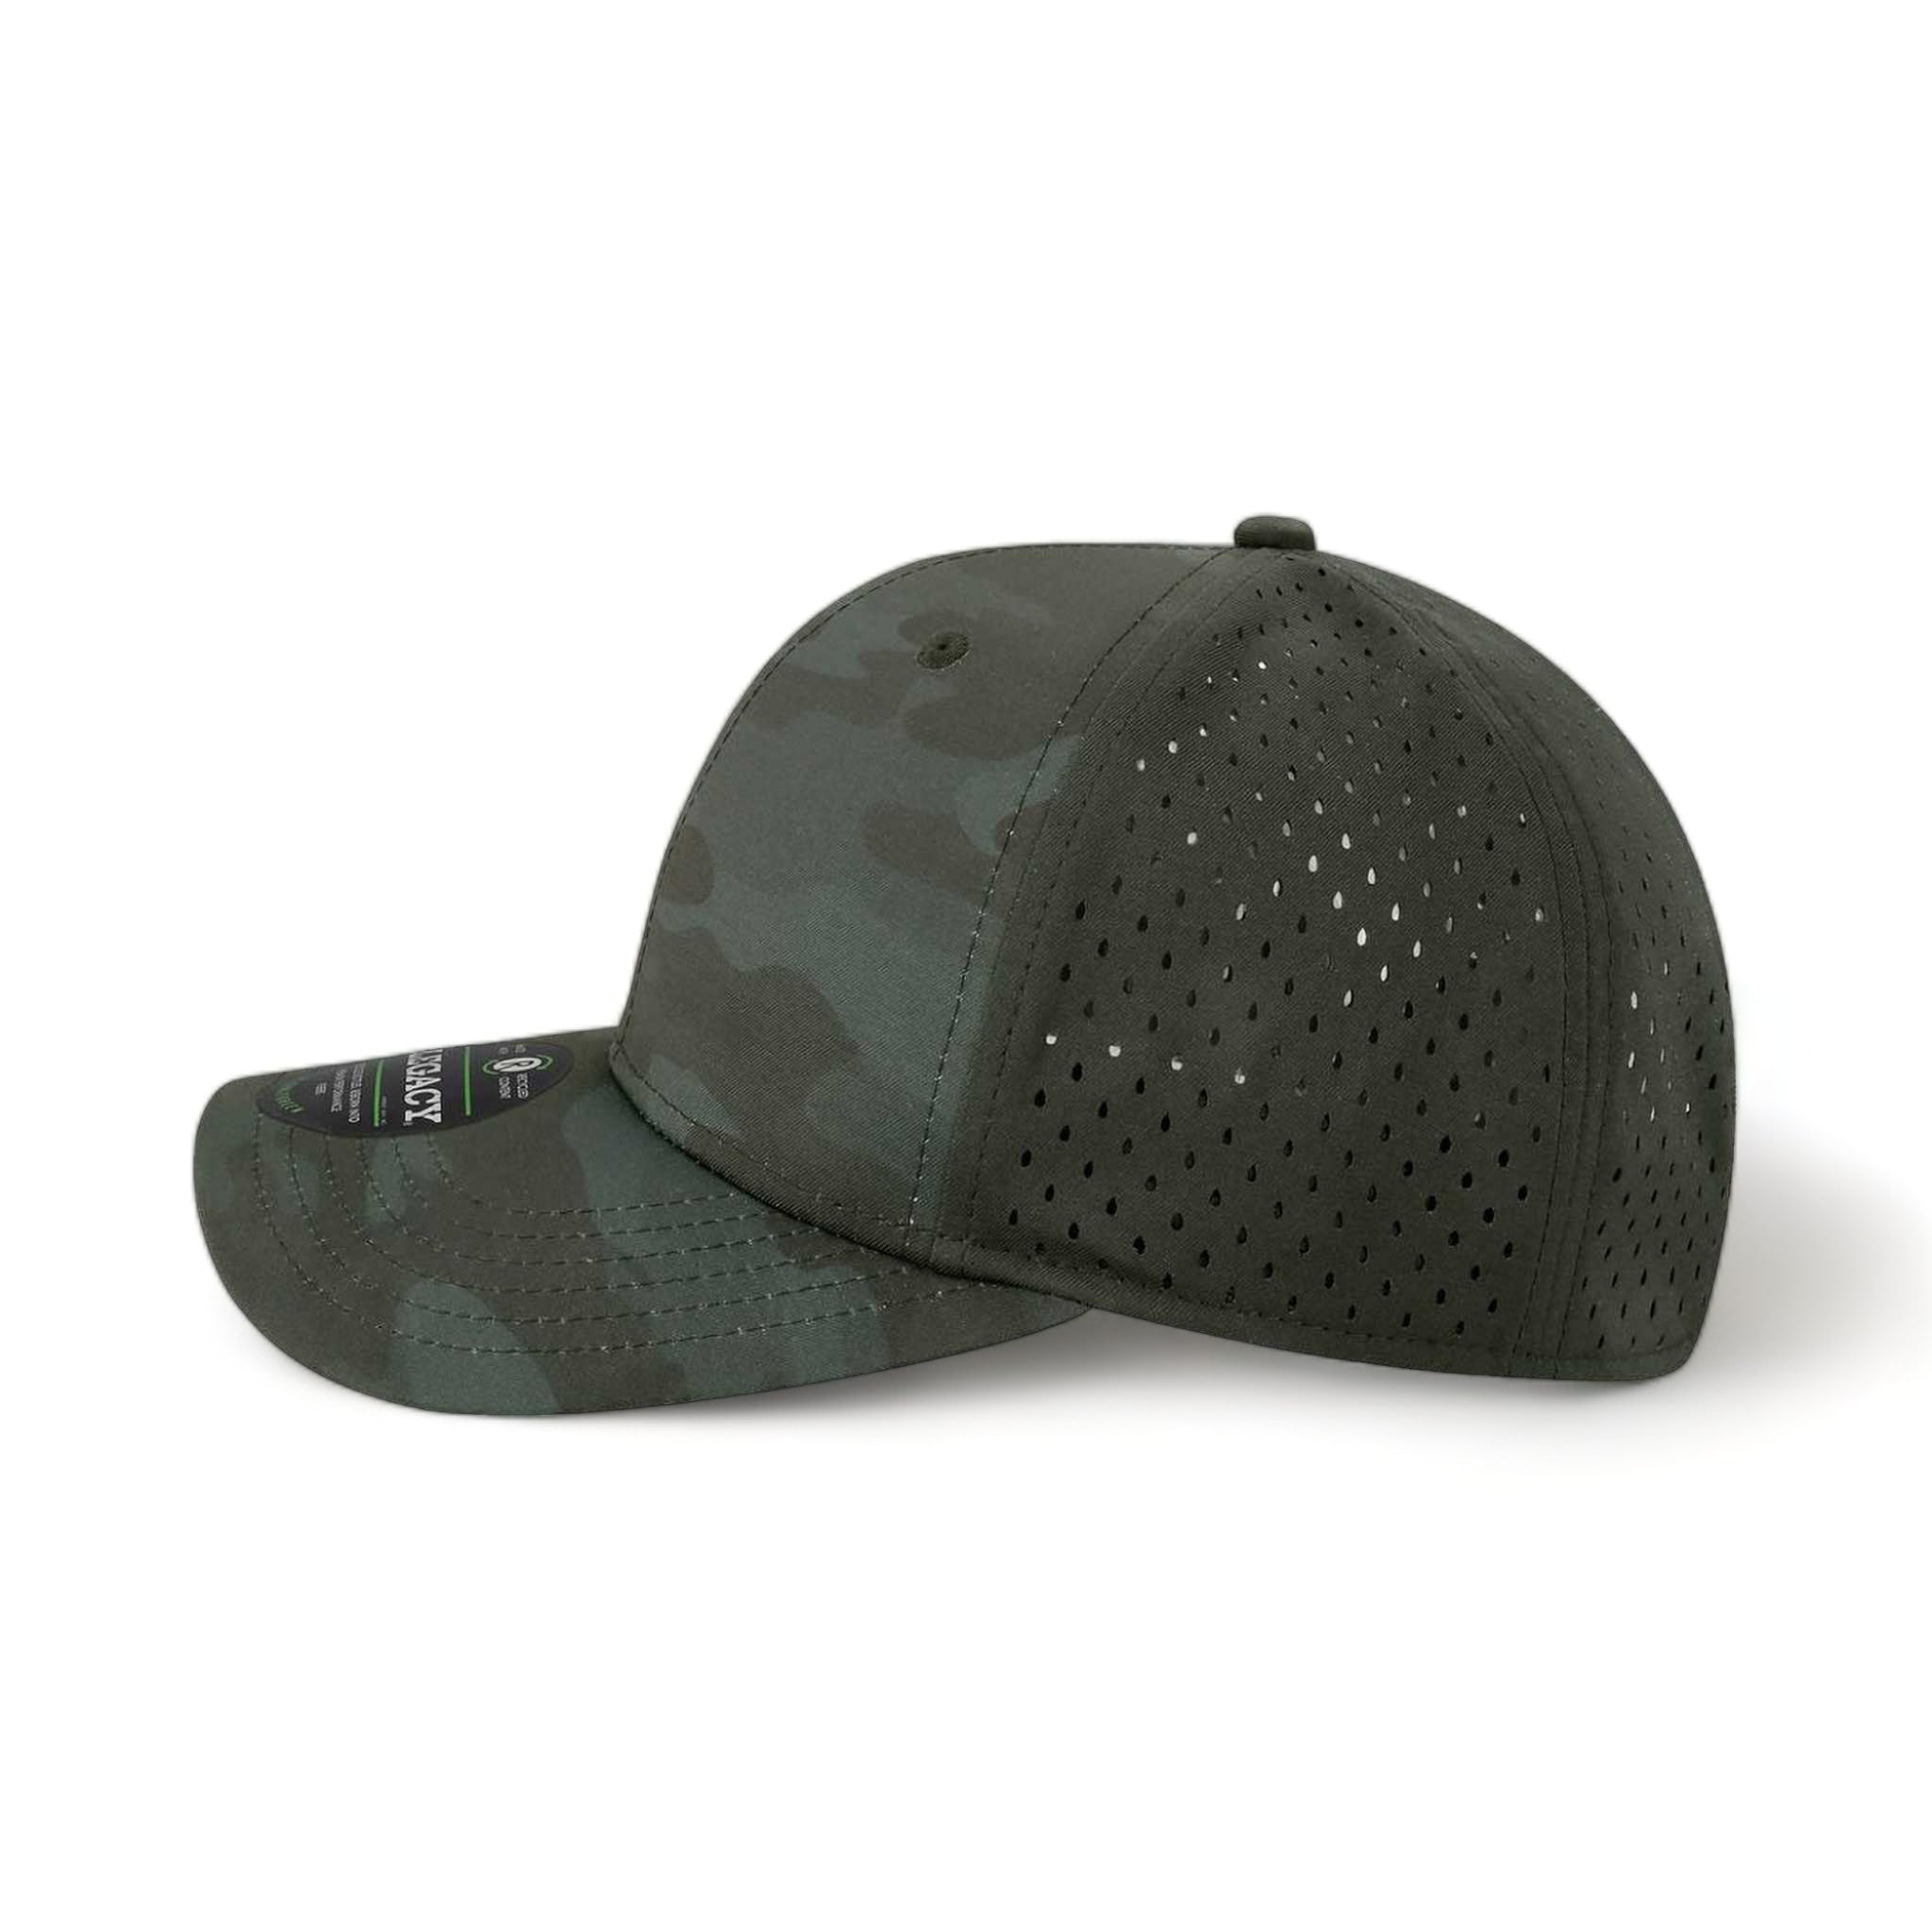 Side view of LEGACY REMPA custom hat in black camo